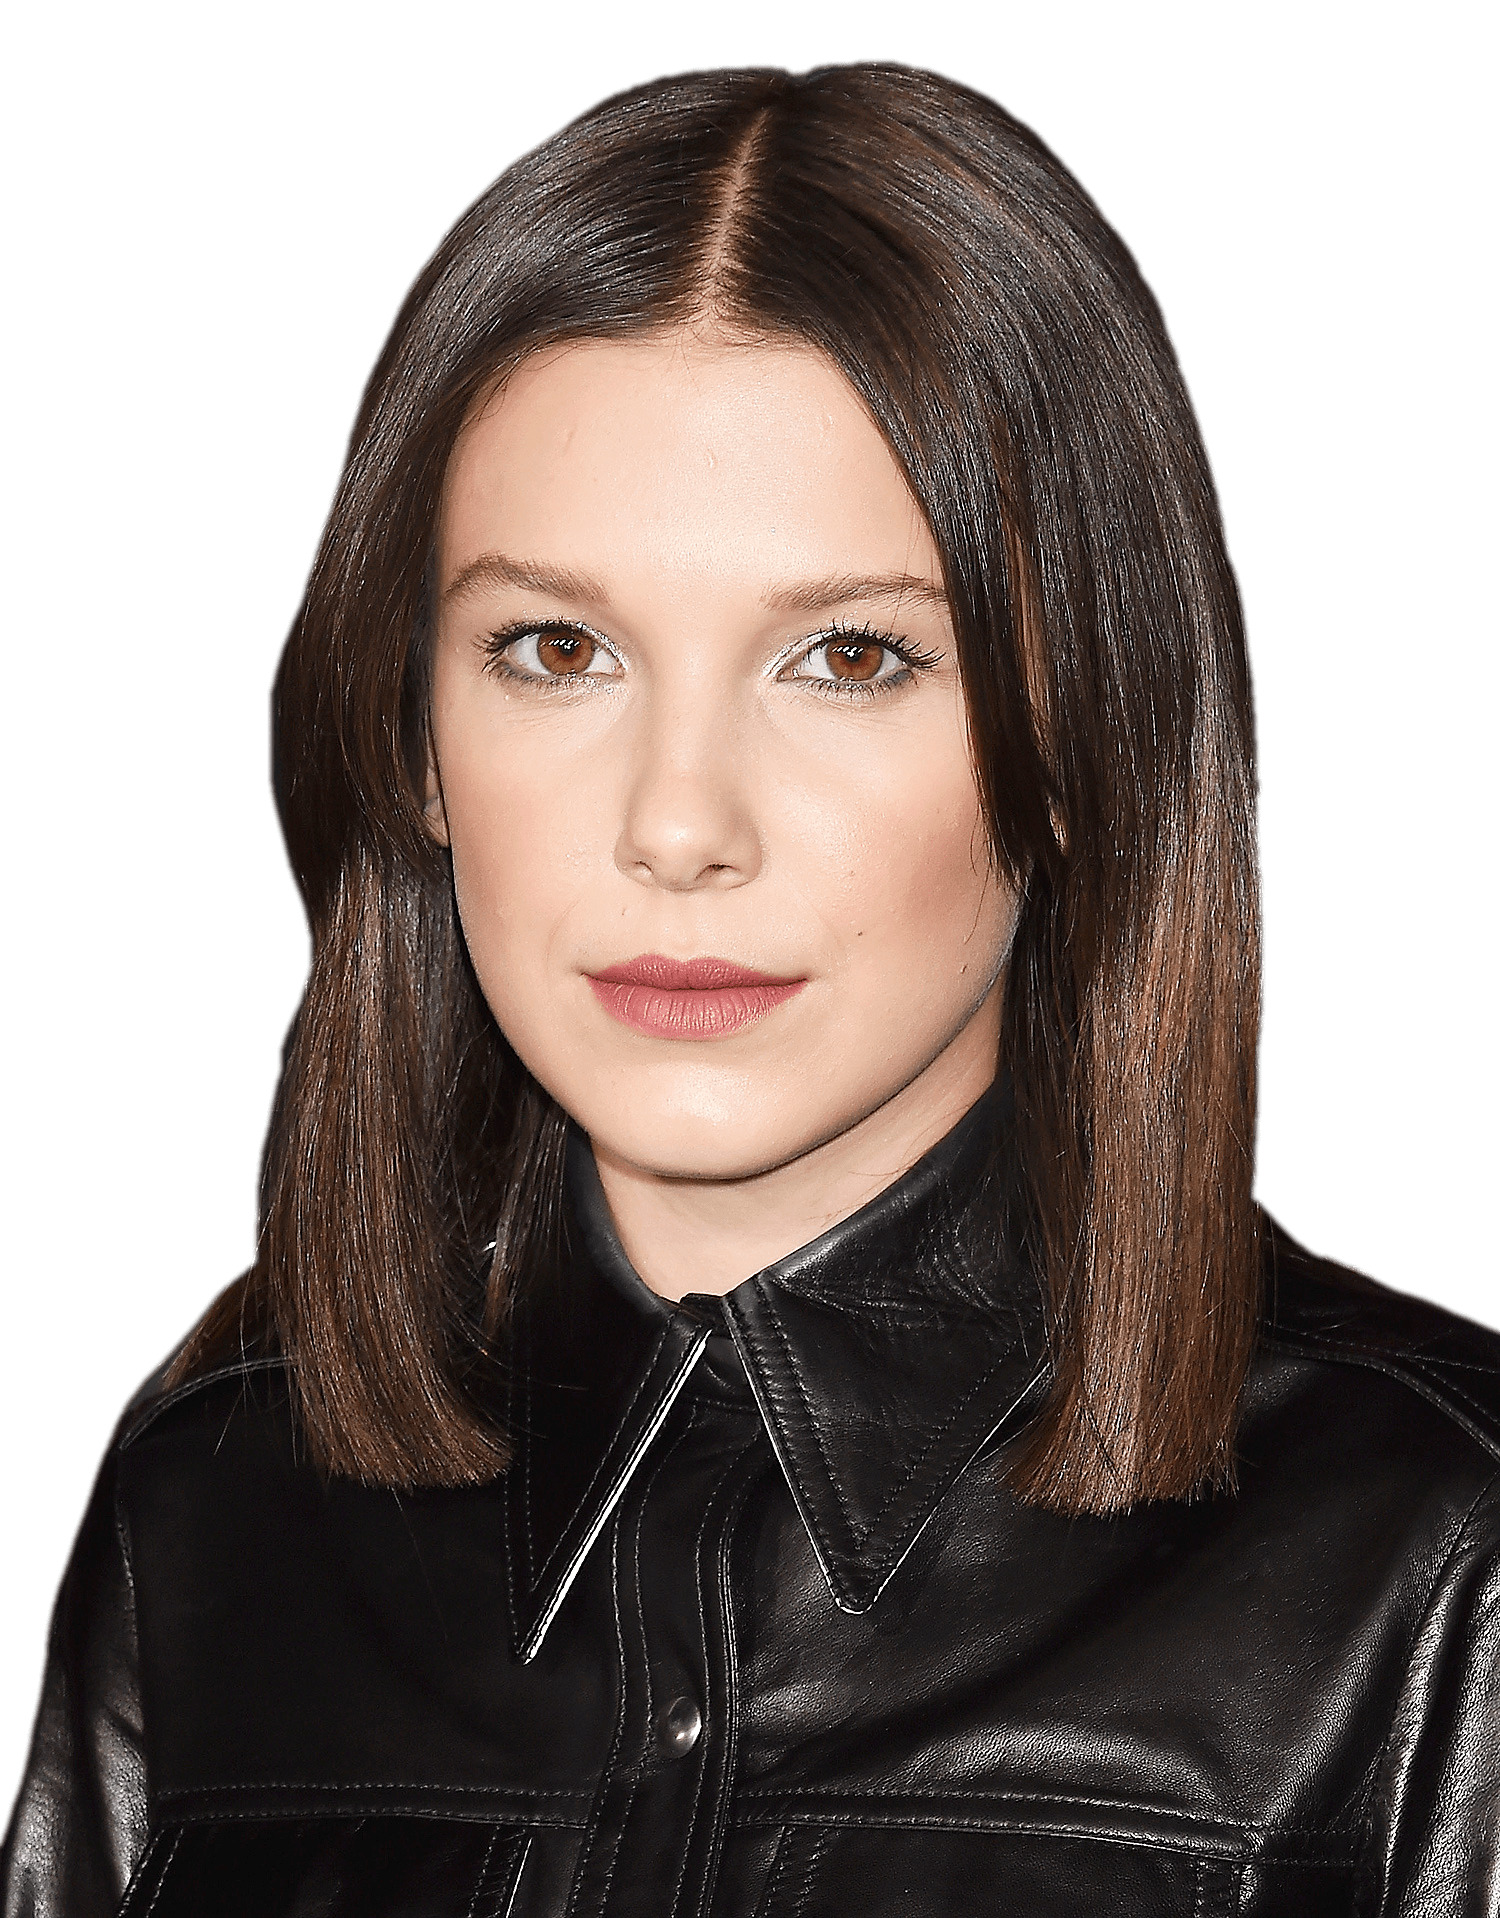 Millie Bobby Brown Portrait icons